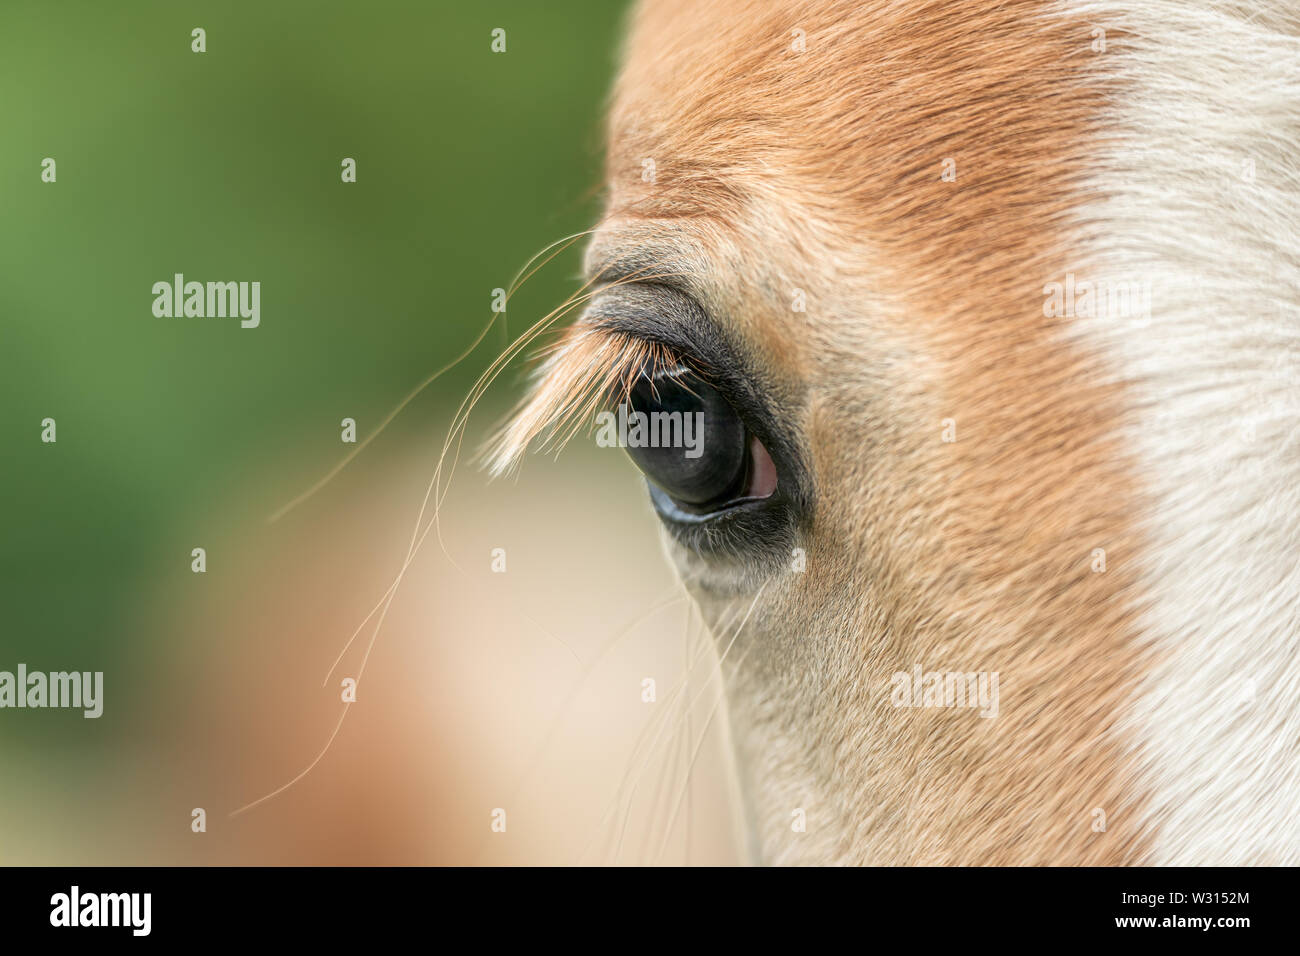 Close-up view of a horse eye with long eyelashes, a blond chestnut Haflinger frontal head with a white blaze marking Stock Photo